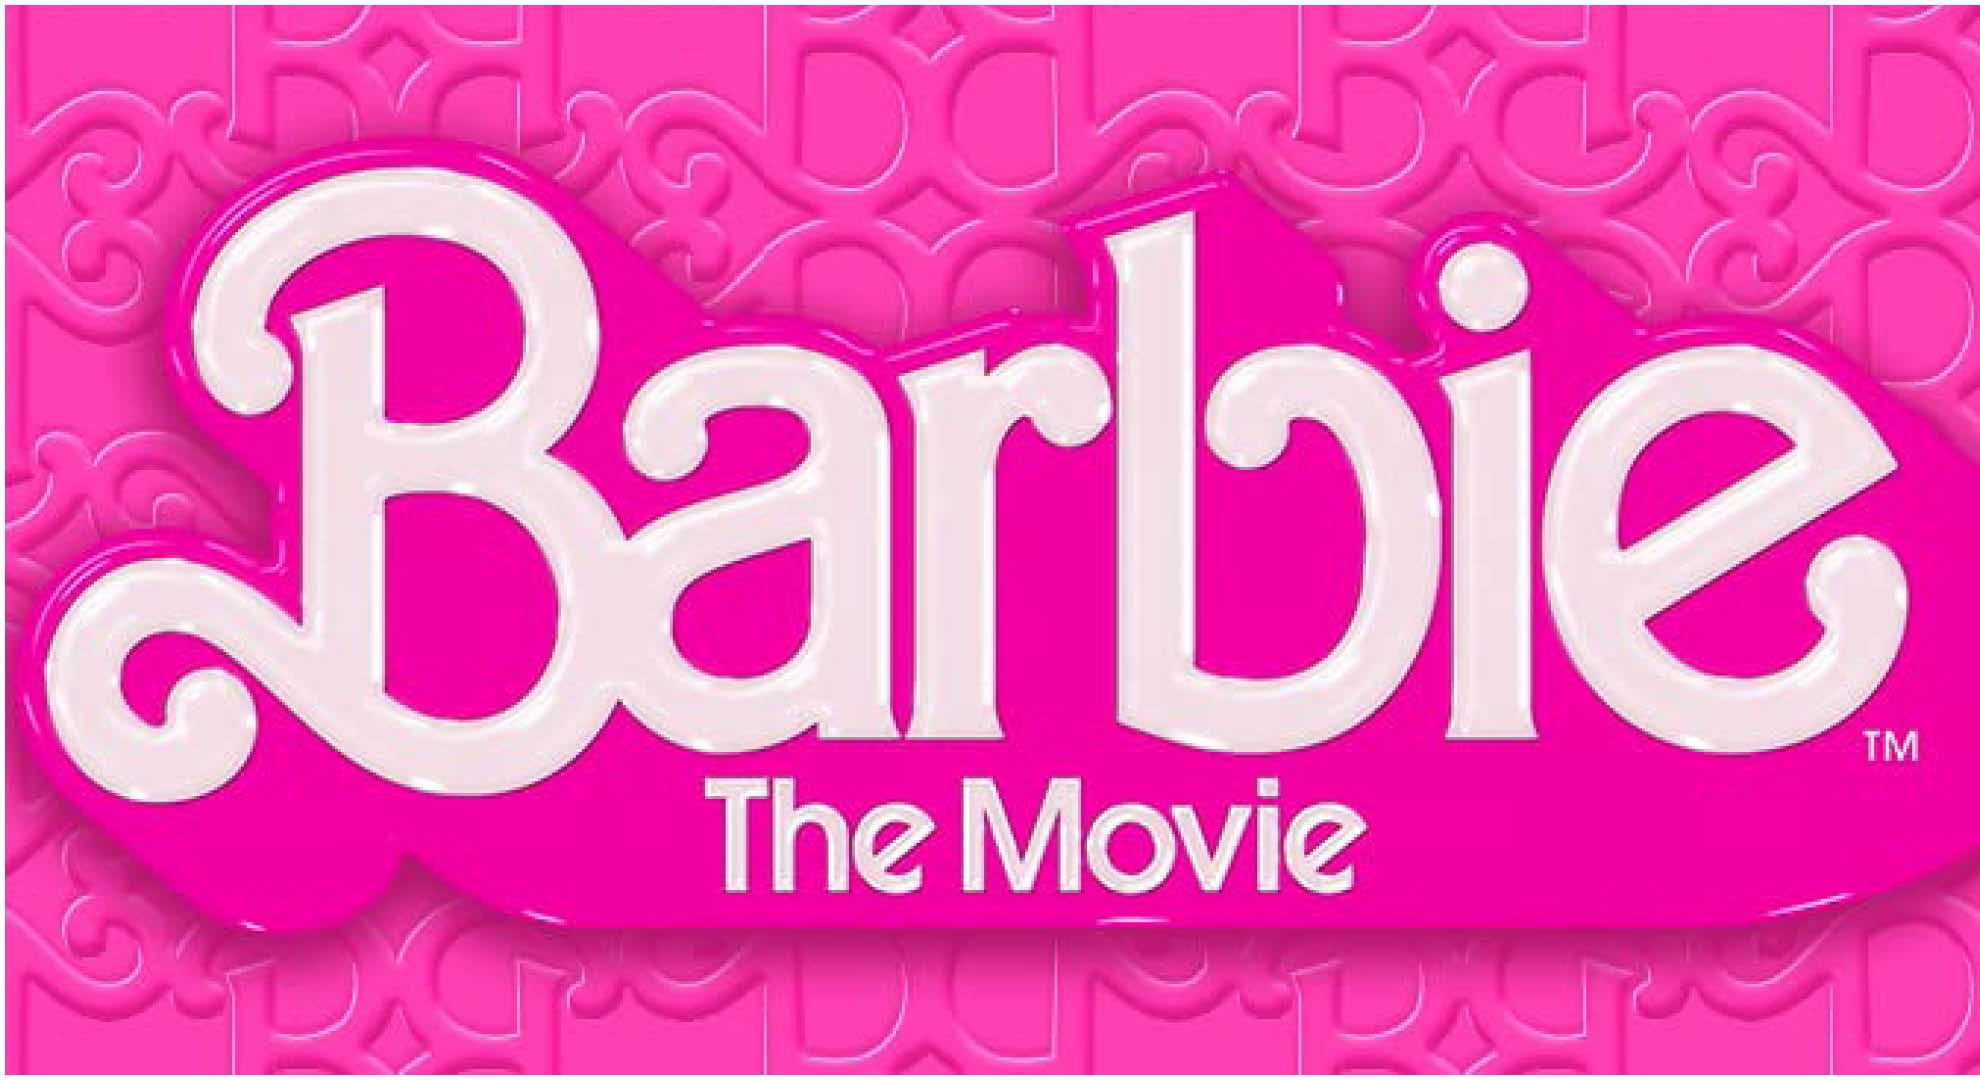 How to Host a Barbie™ The Movie Party?